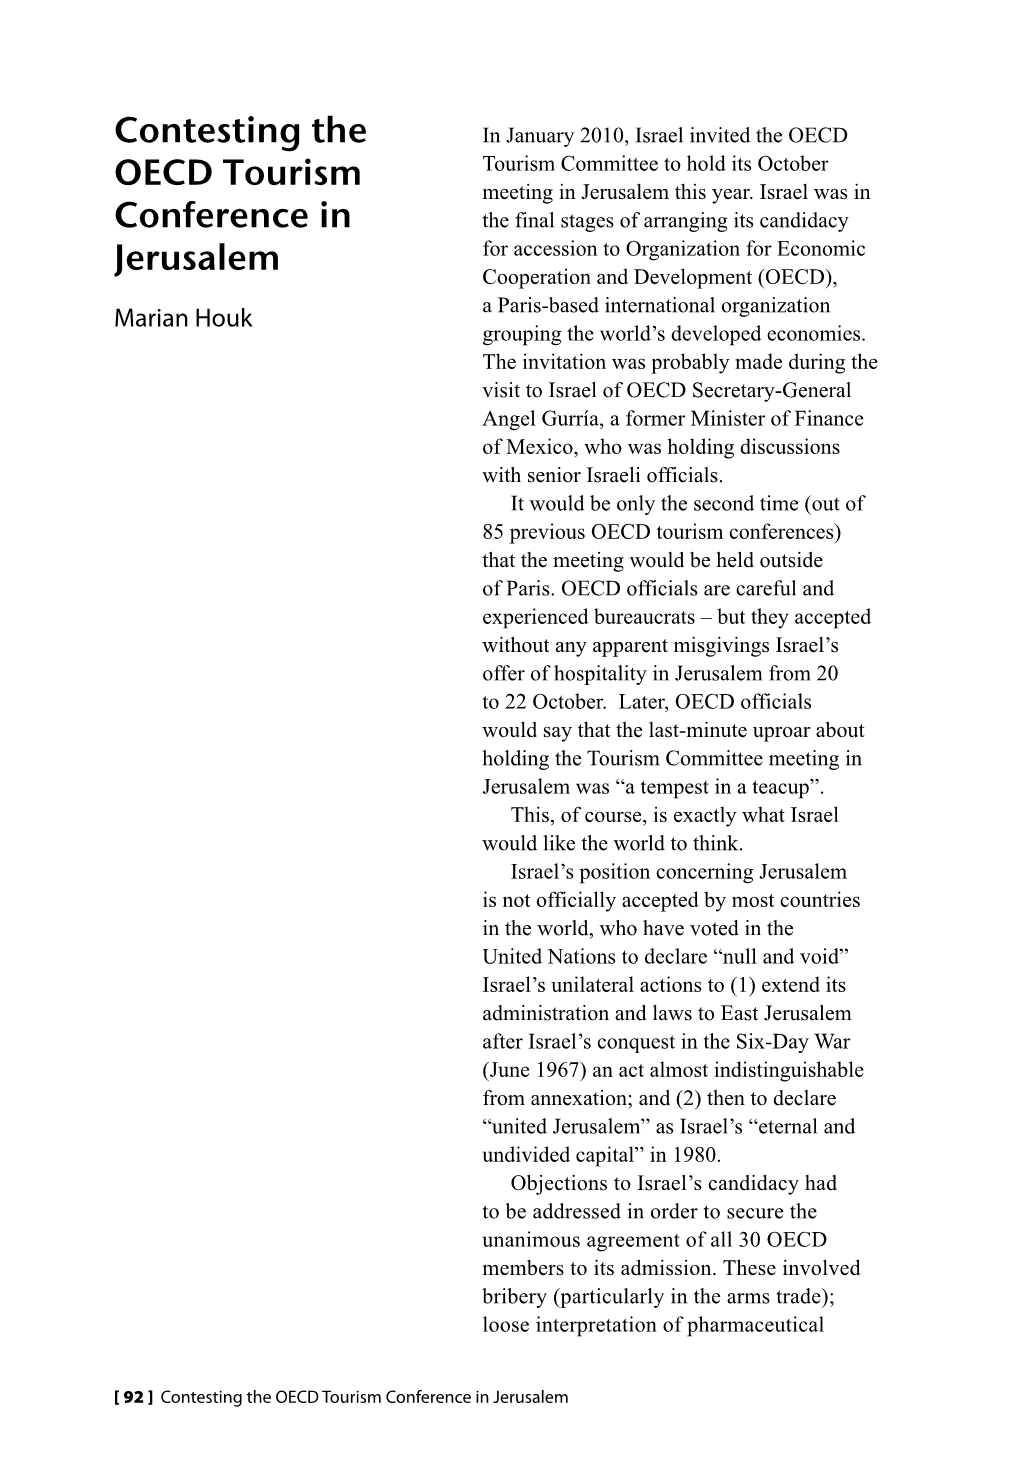 Contesting the OECD Tourism Conference in Jerusalem Patents; and Human Rights Concerns – Including Israel’S Occupation of Territories It Seized in June 1967